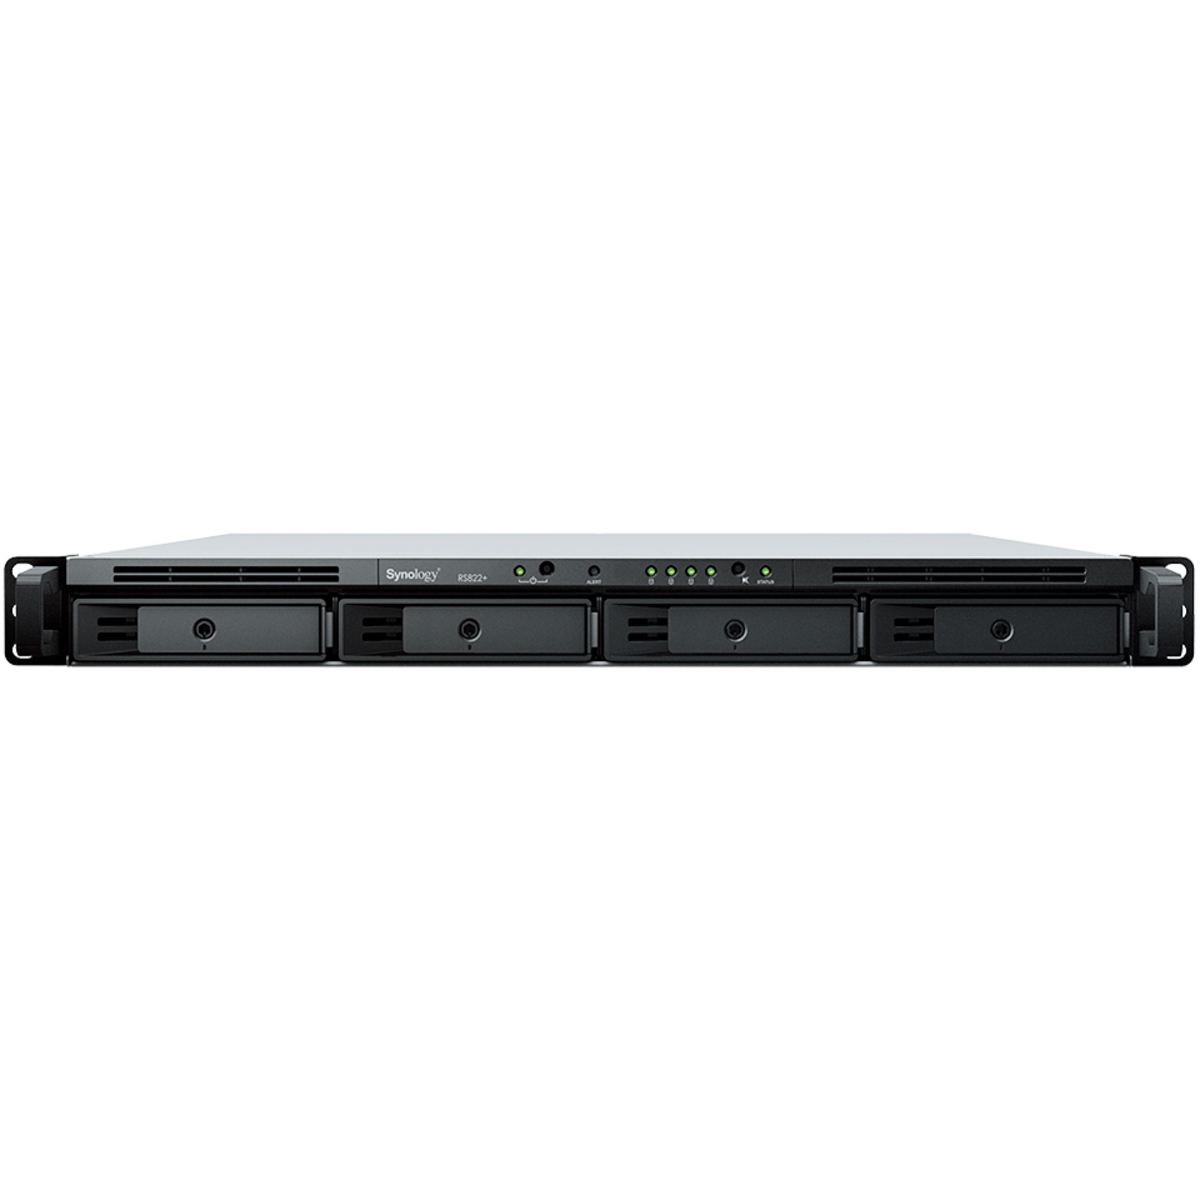 Synology RackStation RS822RP+ 72tb 4-Bay RackMount Multimedia / Power User / Business NAS - Network Attached Storage Device 4x18tb Western Digital Red Pro WD181KFGX 3.5 7200rpm SATA 6Gb/s HDD NAS Class Drives Installed - Burn-In Tested - FREE RAM UPGRADE RackStation RS822RP+